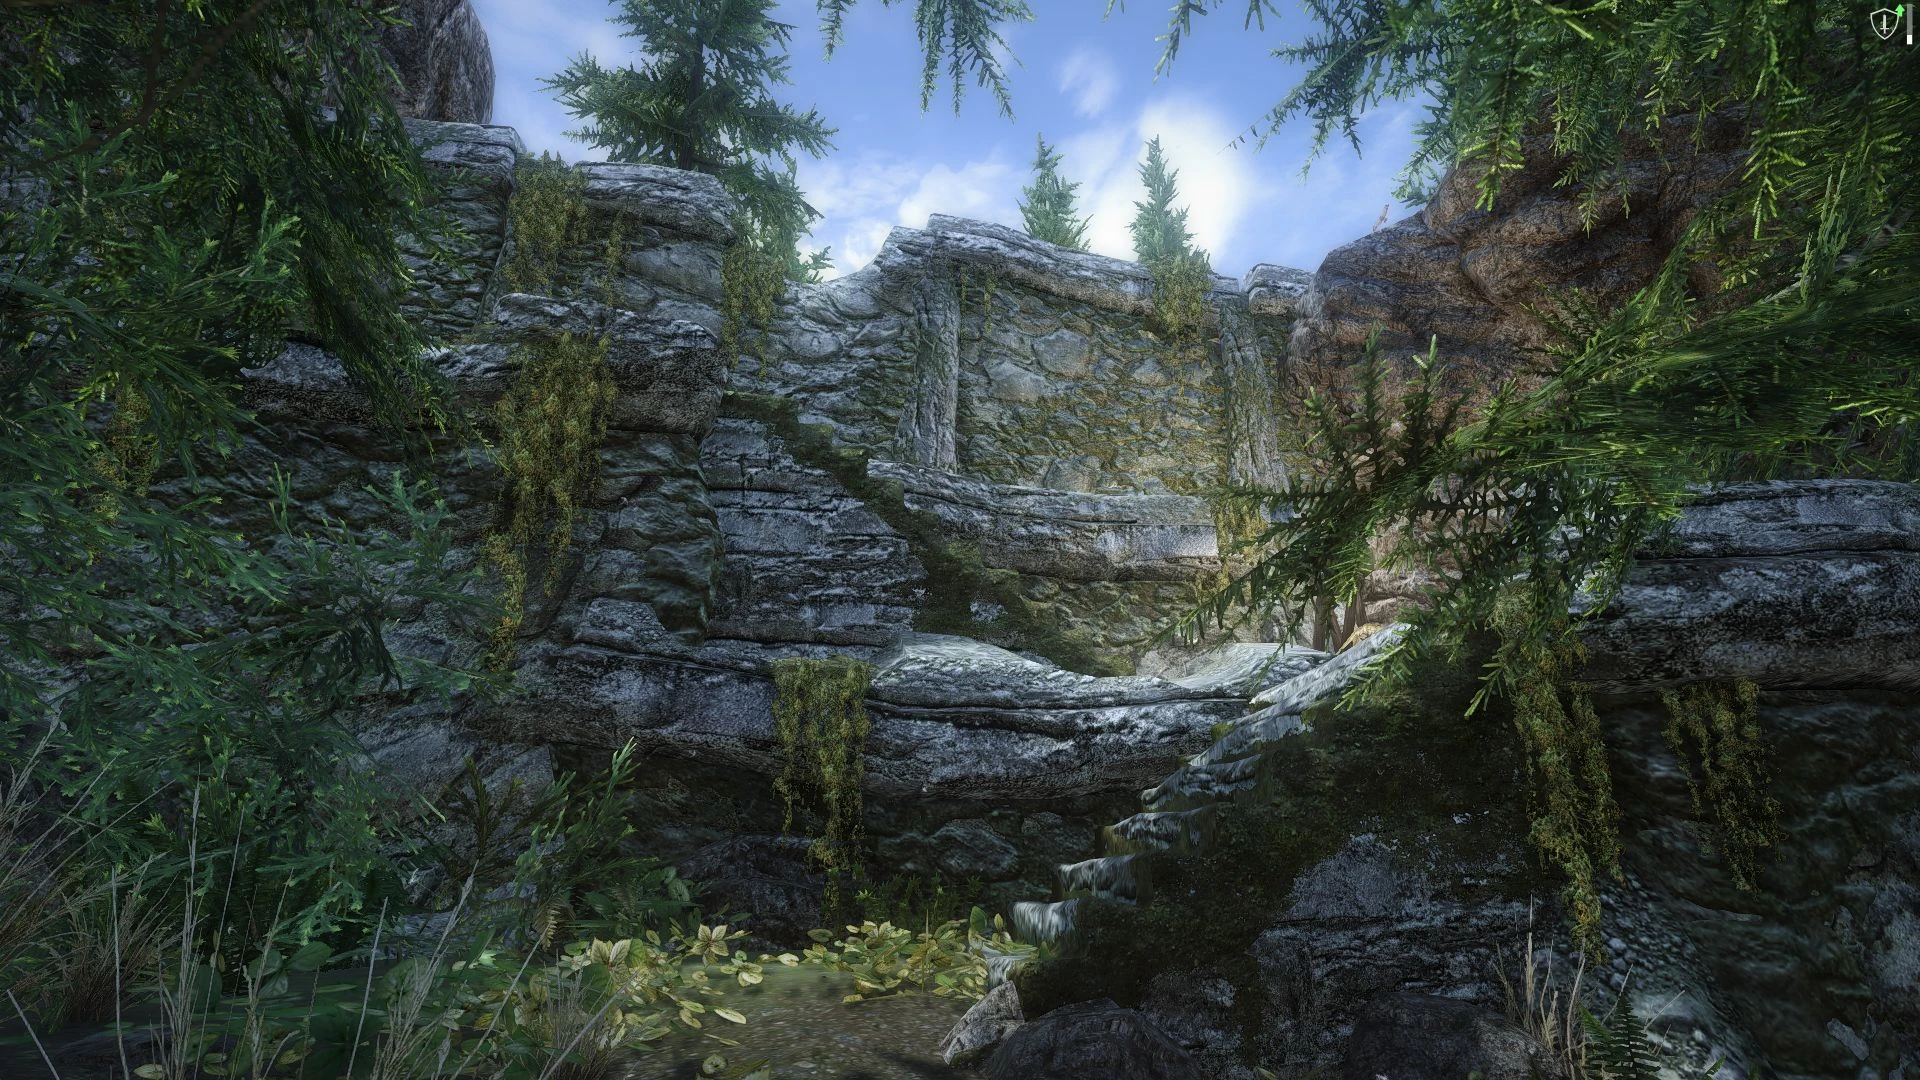 Bloated Mans Grotto Skyrim / This screenshot in bloated man's grotto